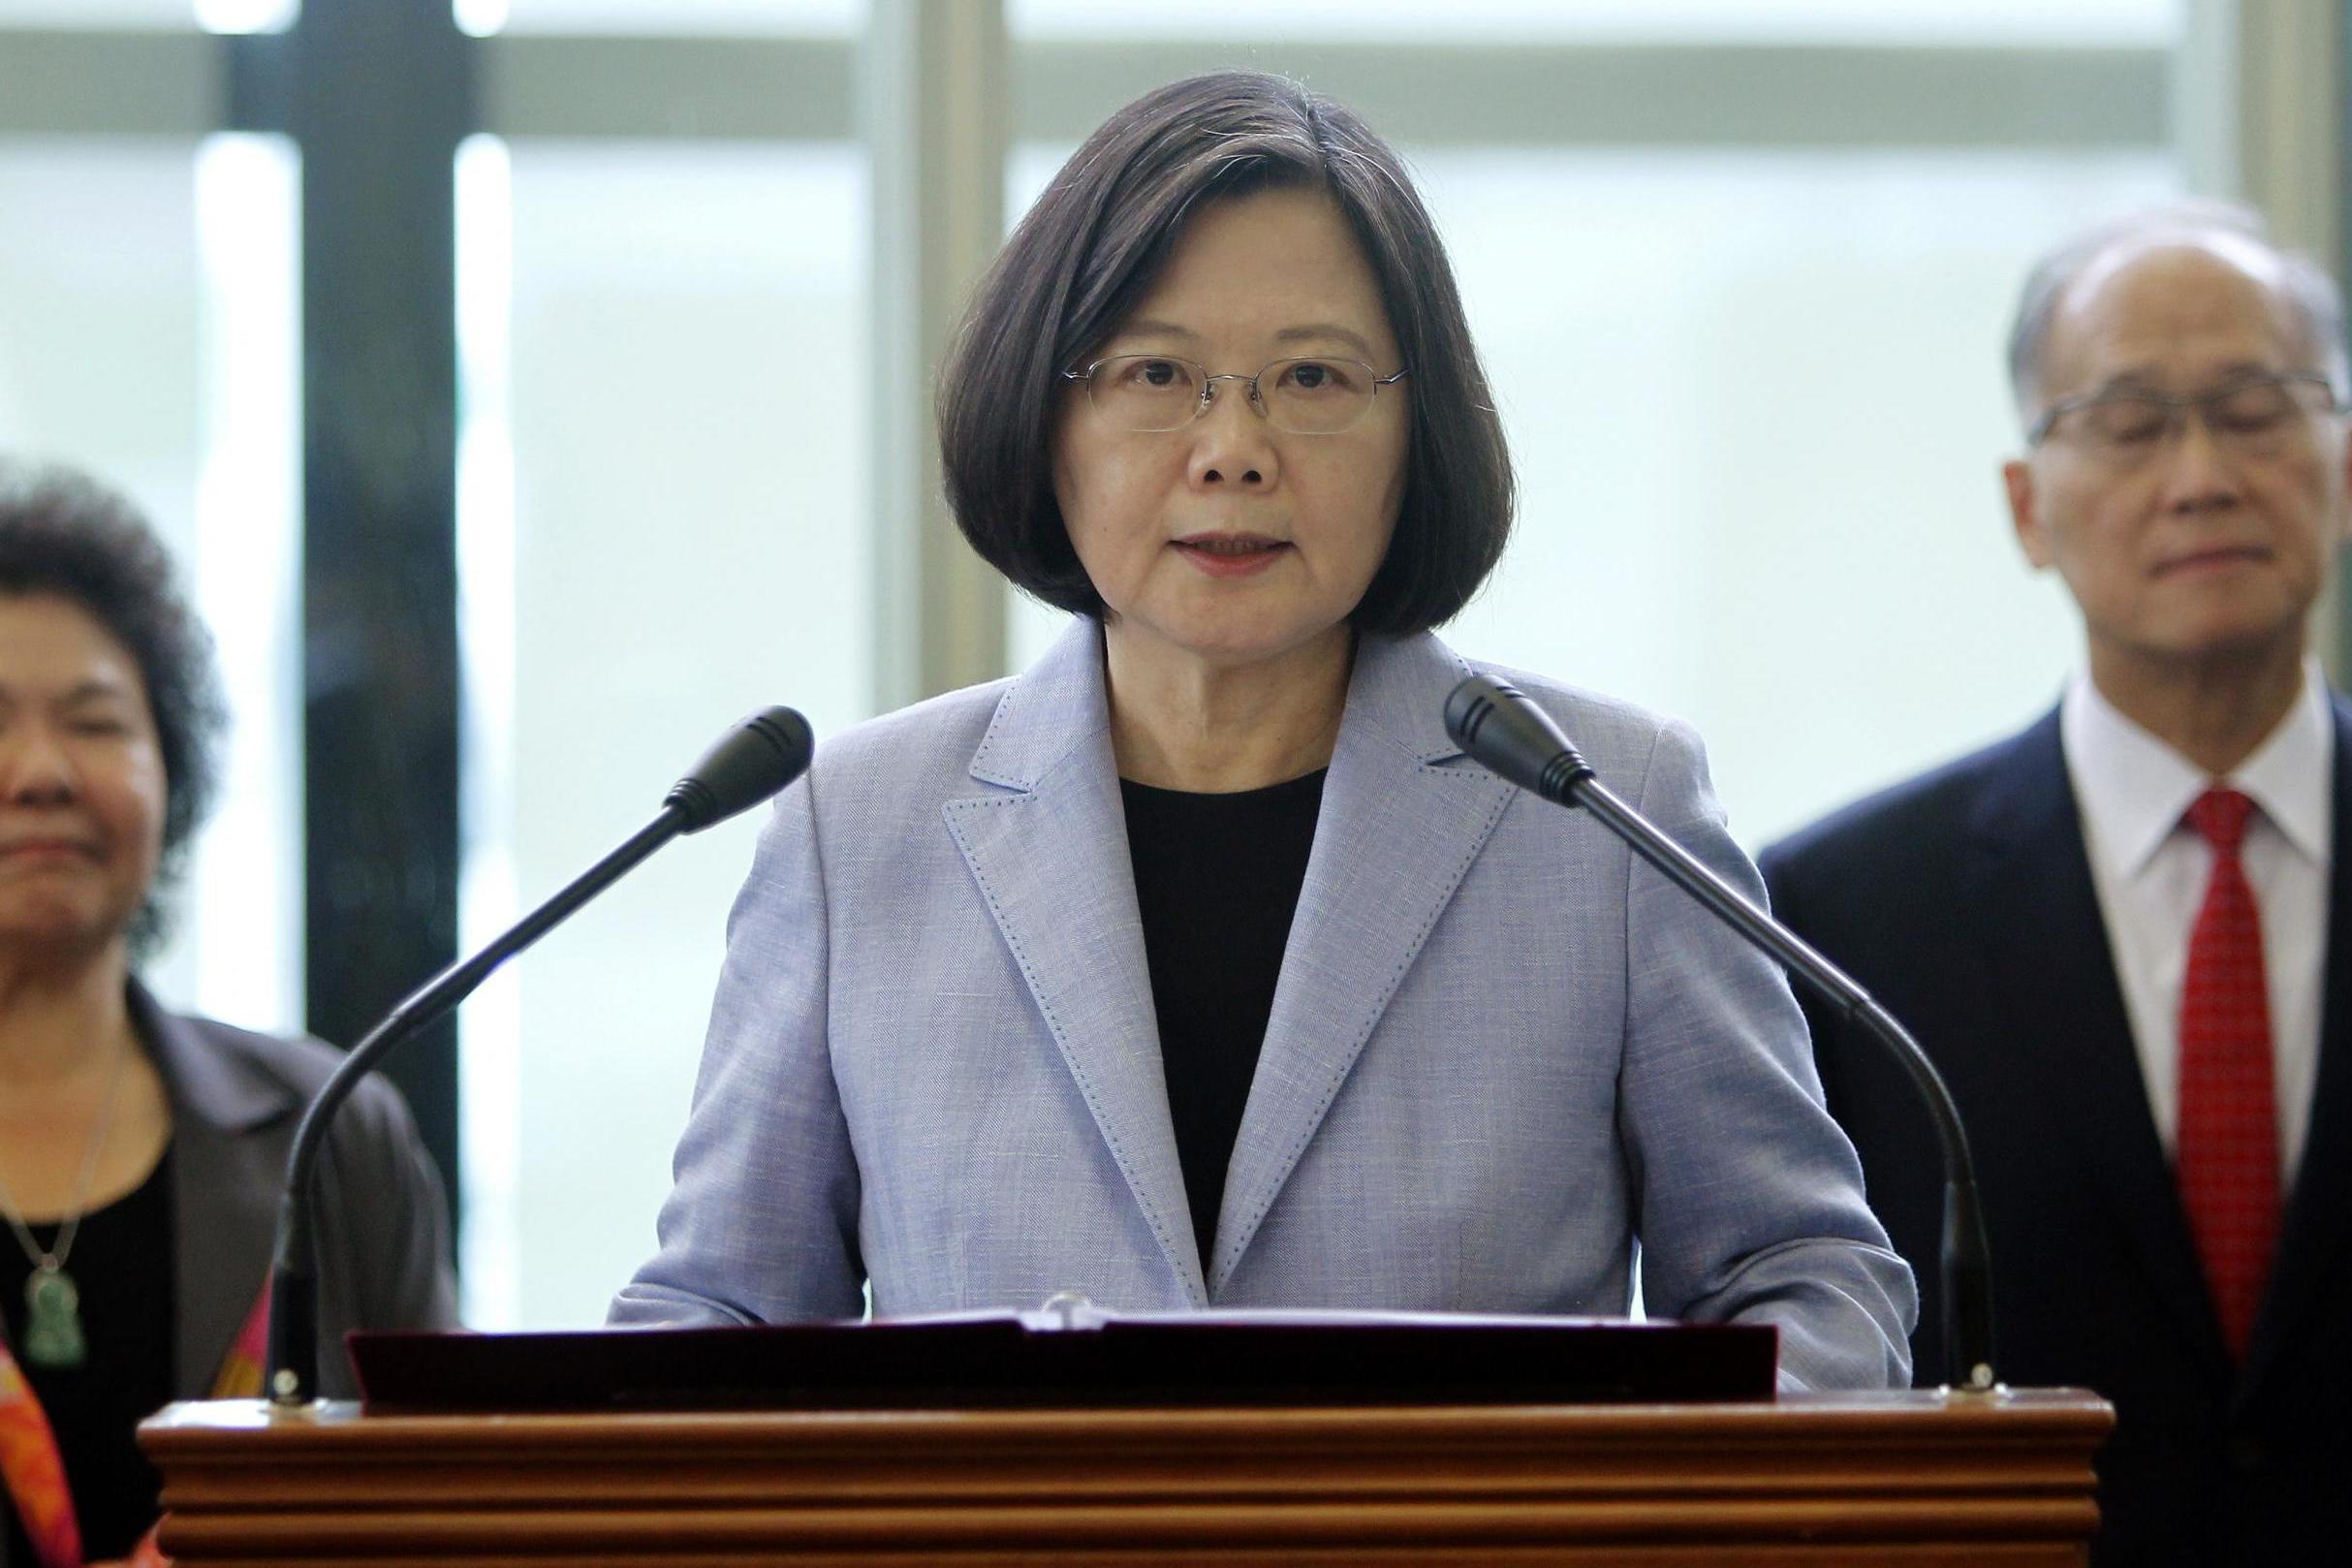 Taiwan president Tsai Ing-wen visited Houston and Los Angeles last week, where she met US lawmakers